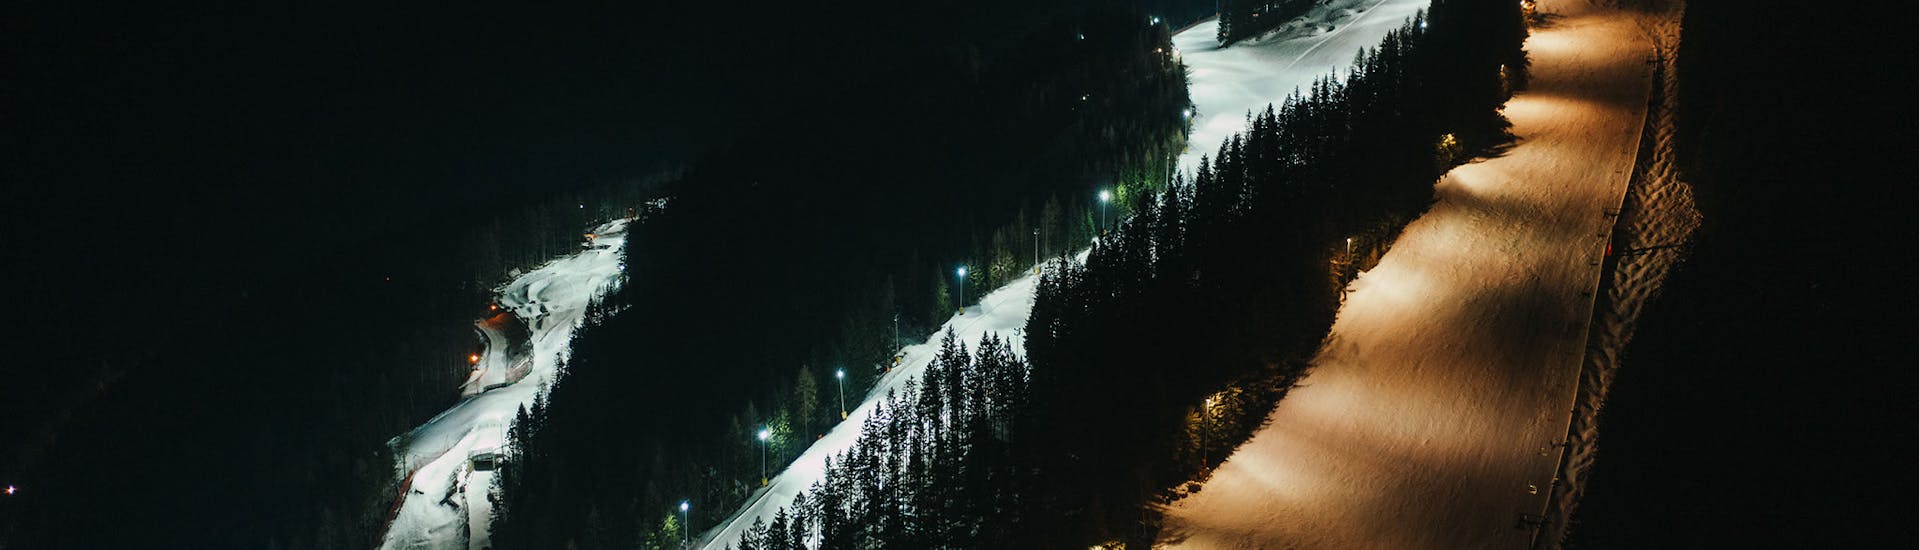 A picture of a spectacular night piste for Private Ski Lessons for Kids & Adults - Night Piste from Schneesportschule Zauberberg Semmering.